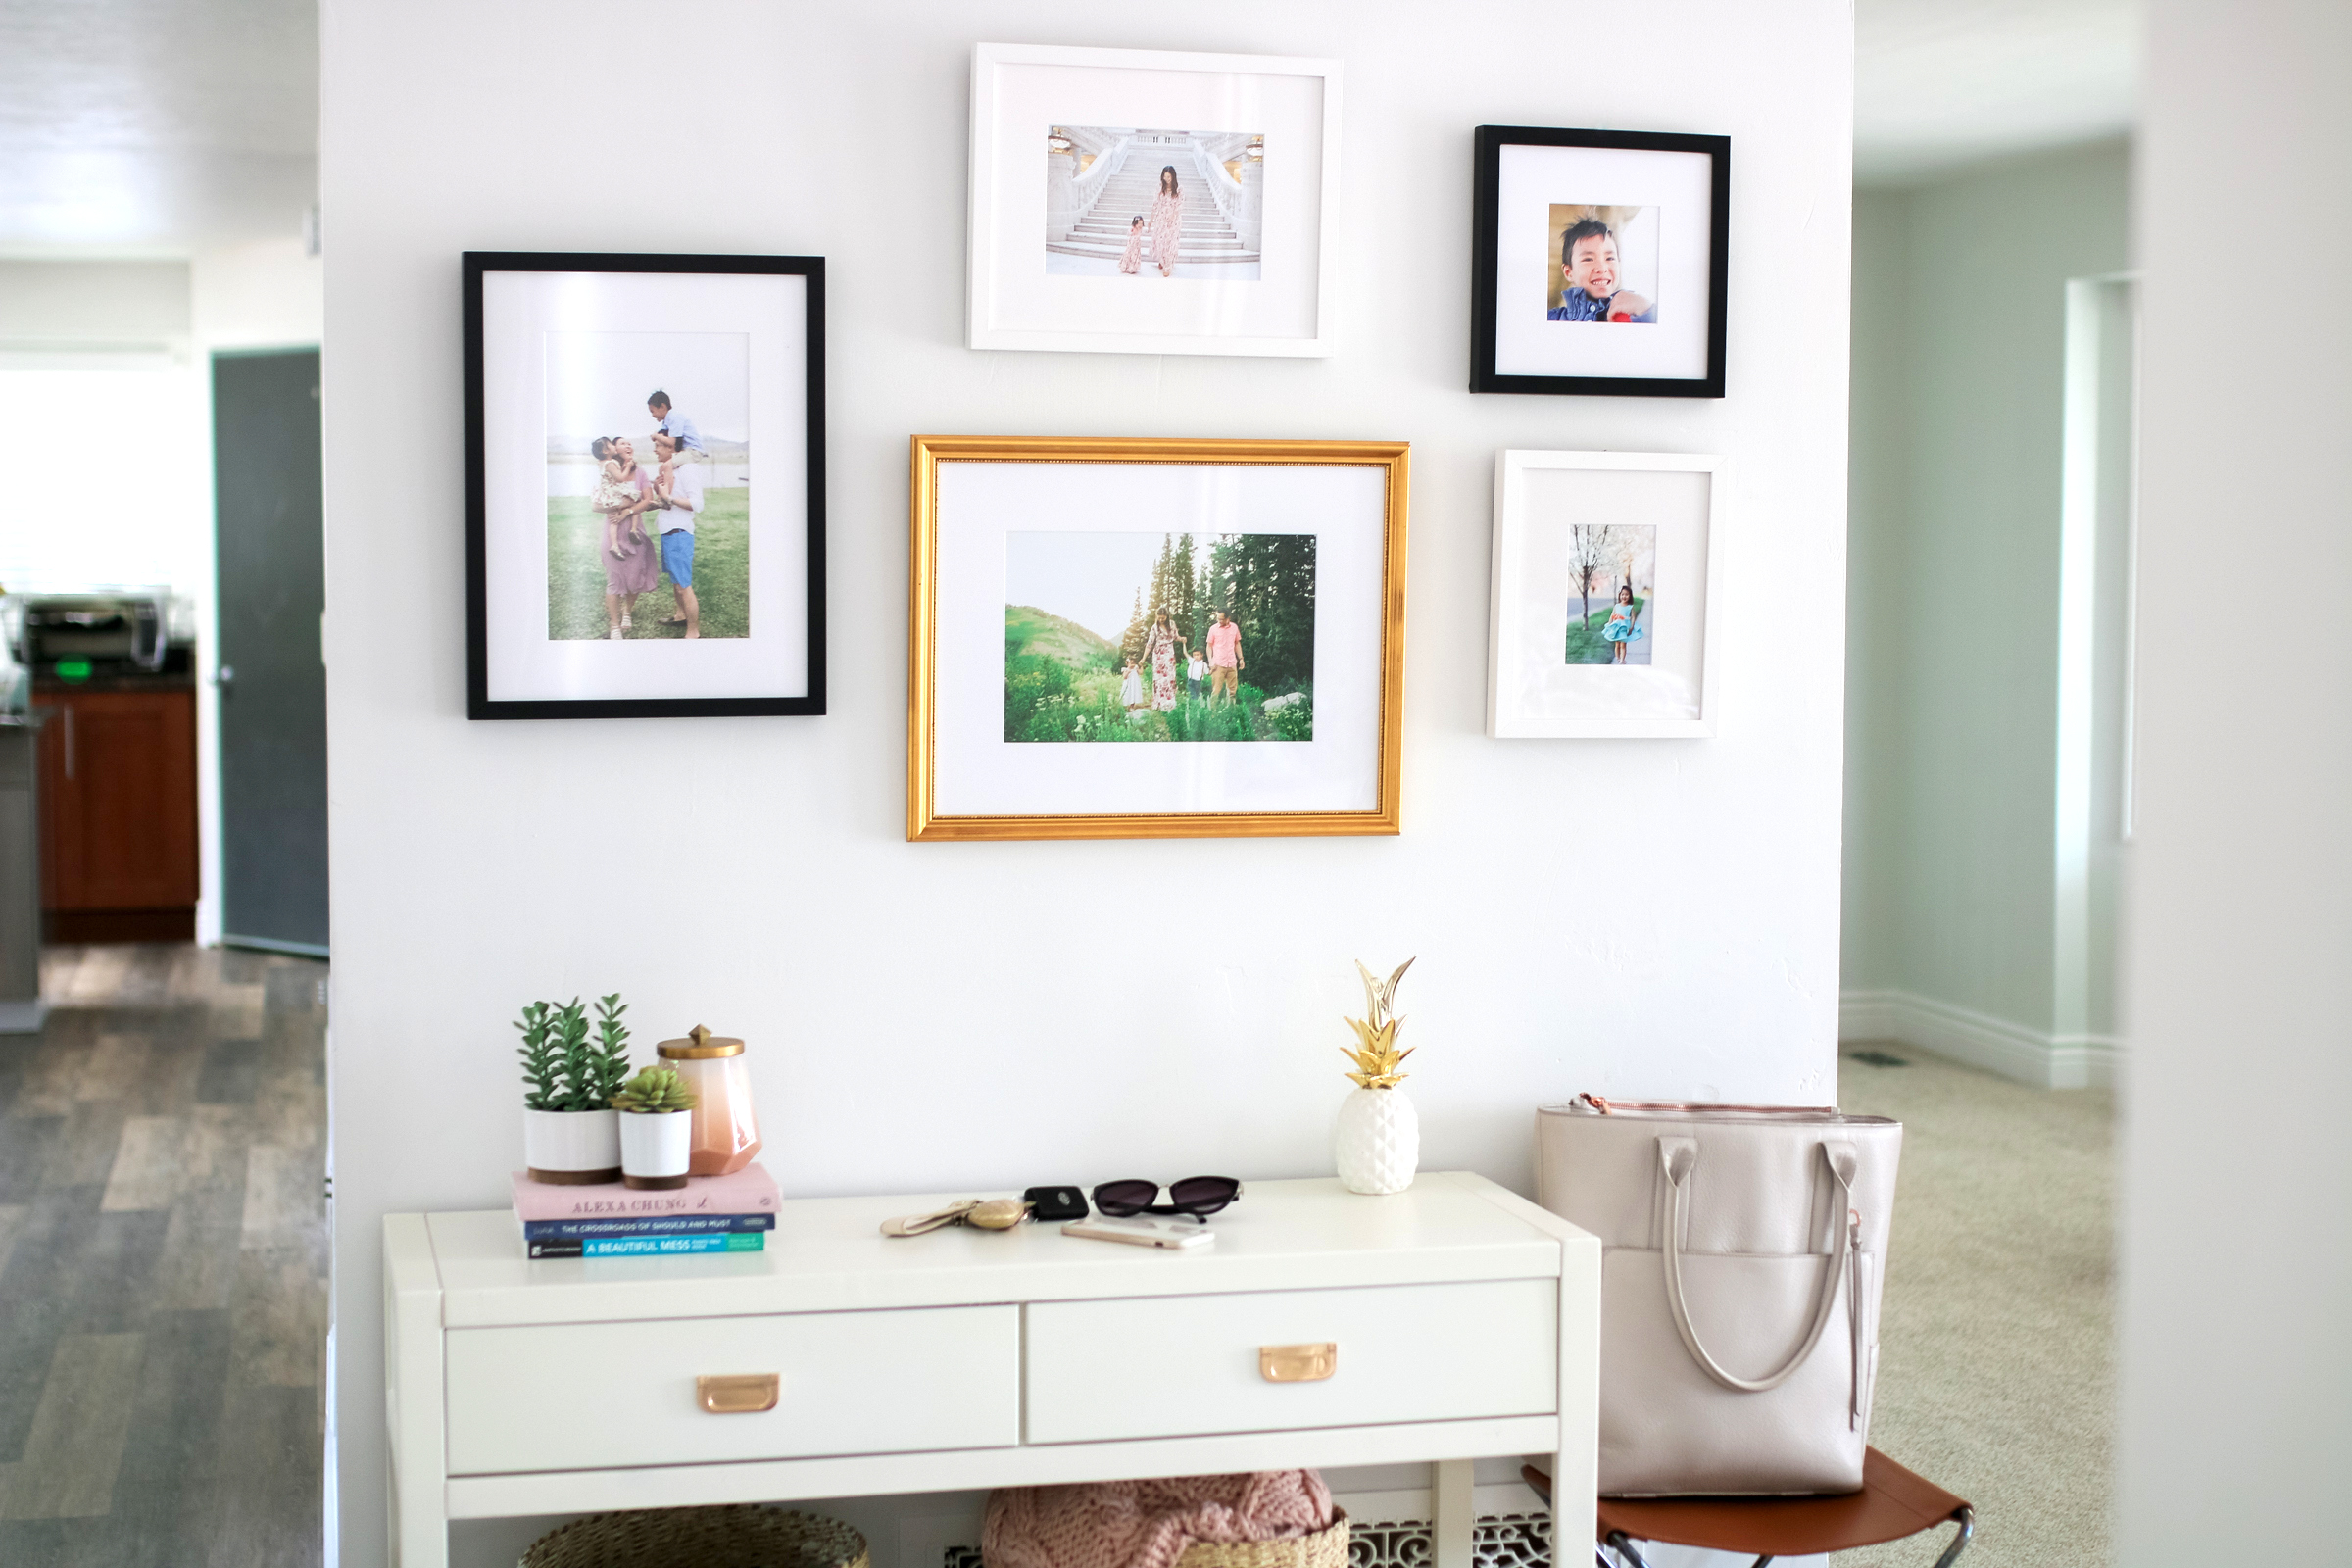 Our New Home Big Reveal: Stylish Entryway Decor Ideas by popular blogger Sandy A La Mode